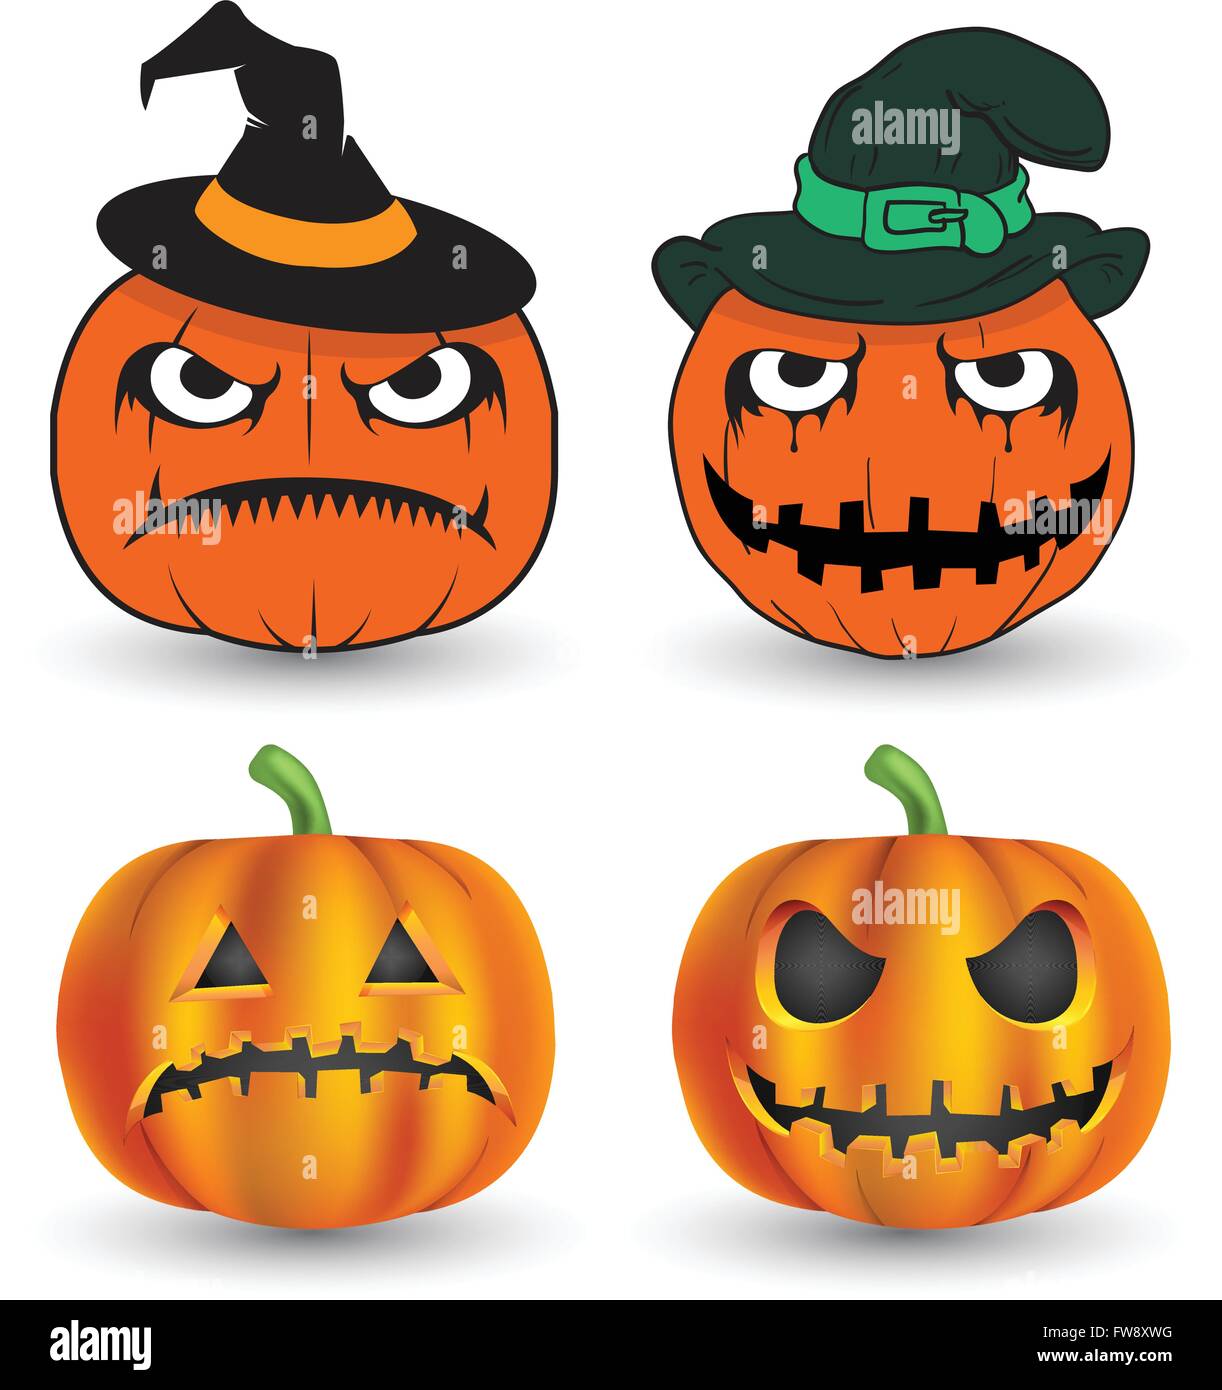 Halloween pumpkins set. Vector illustration. Can use for printing and web element. Stock Vector